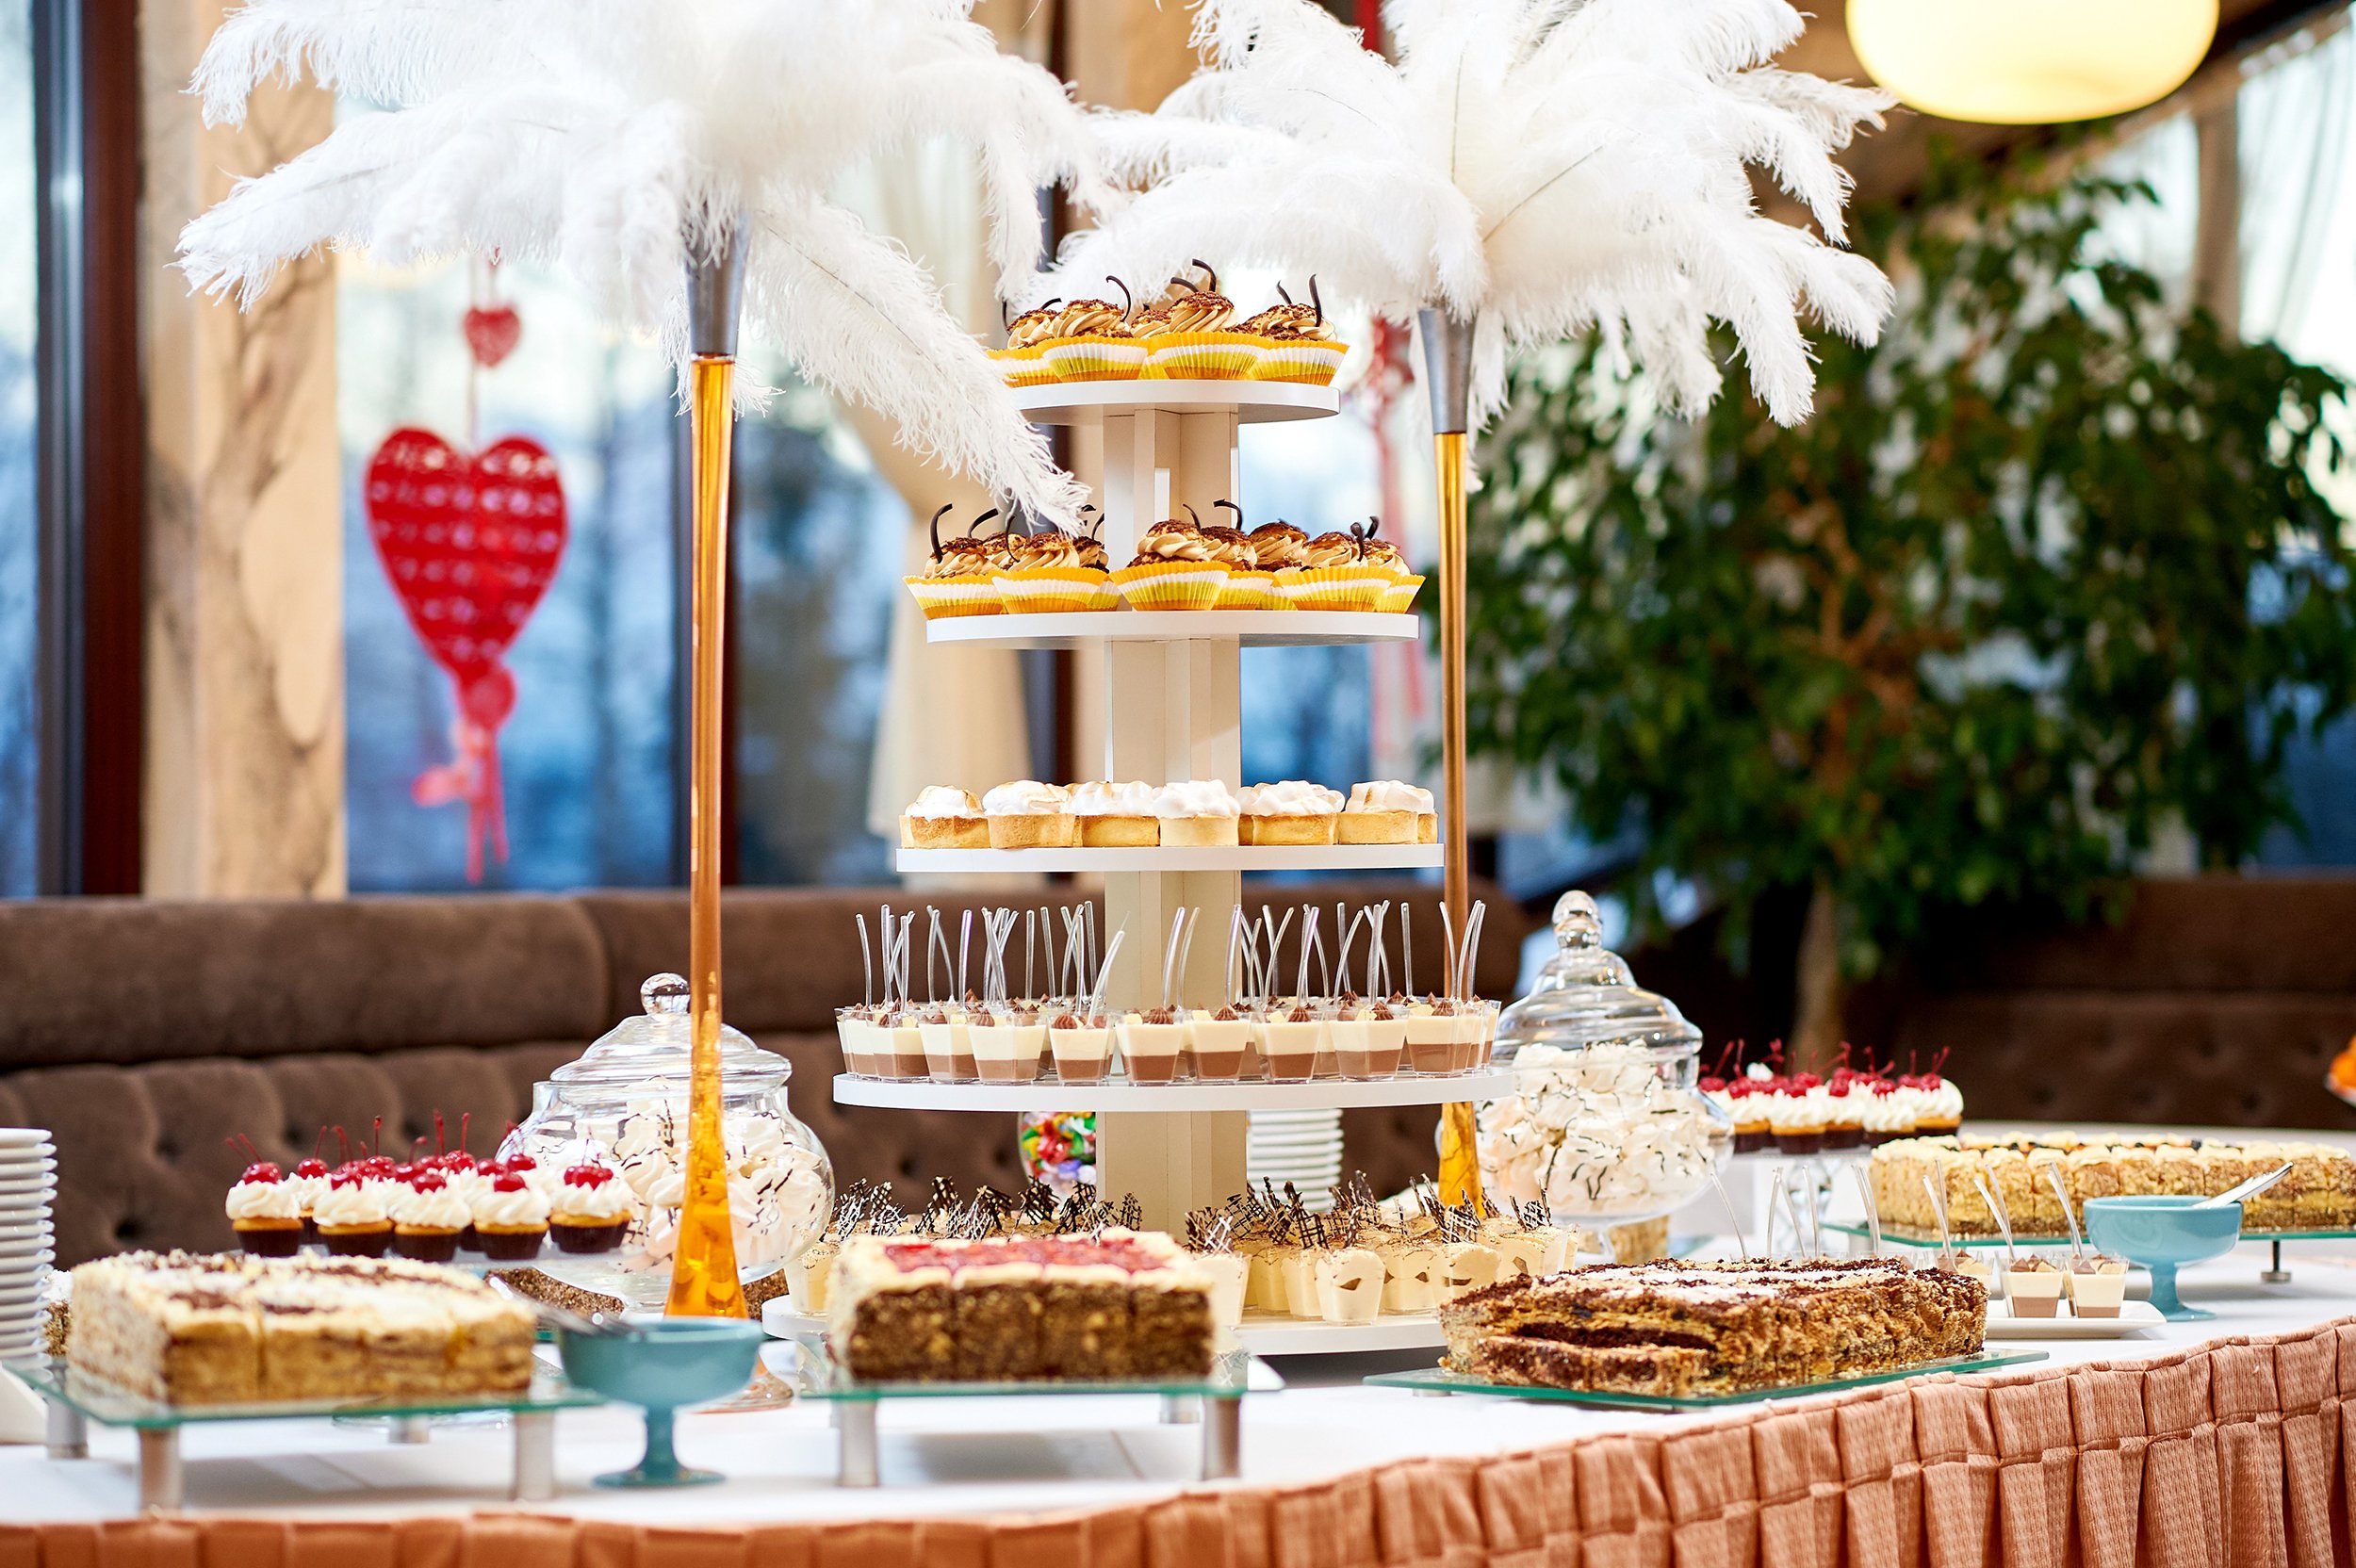 shot-restaurant-table-with-plenty-different-tasty-desserts-cupcakes-creamy-cakes-sweet-sugar-eating-cafe-celebration-concept.jpg